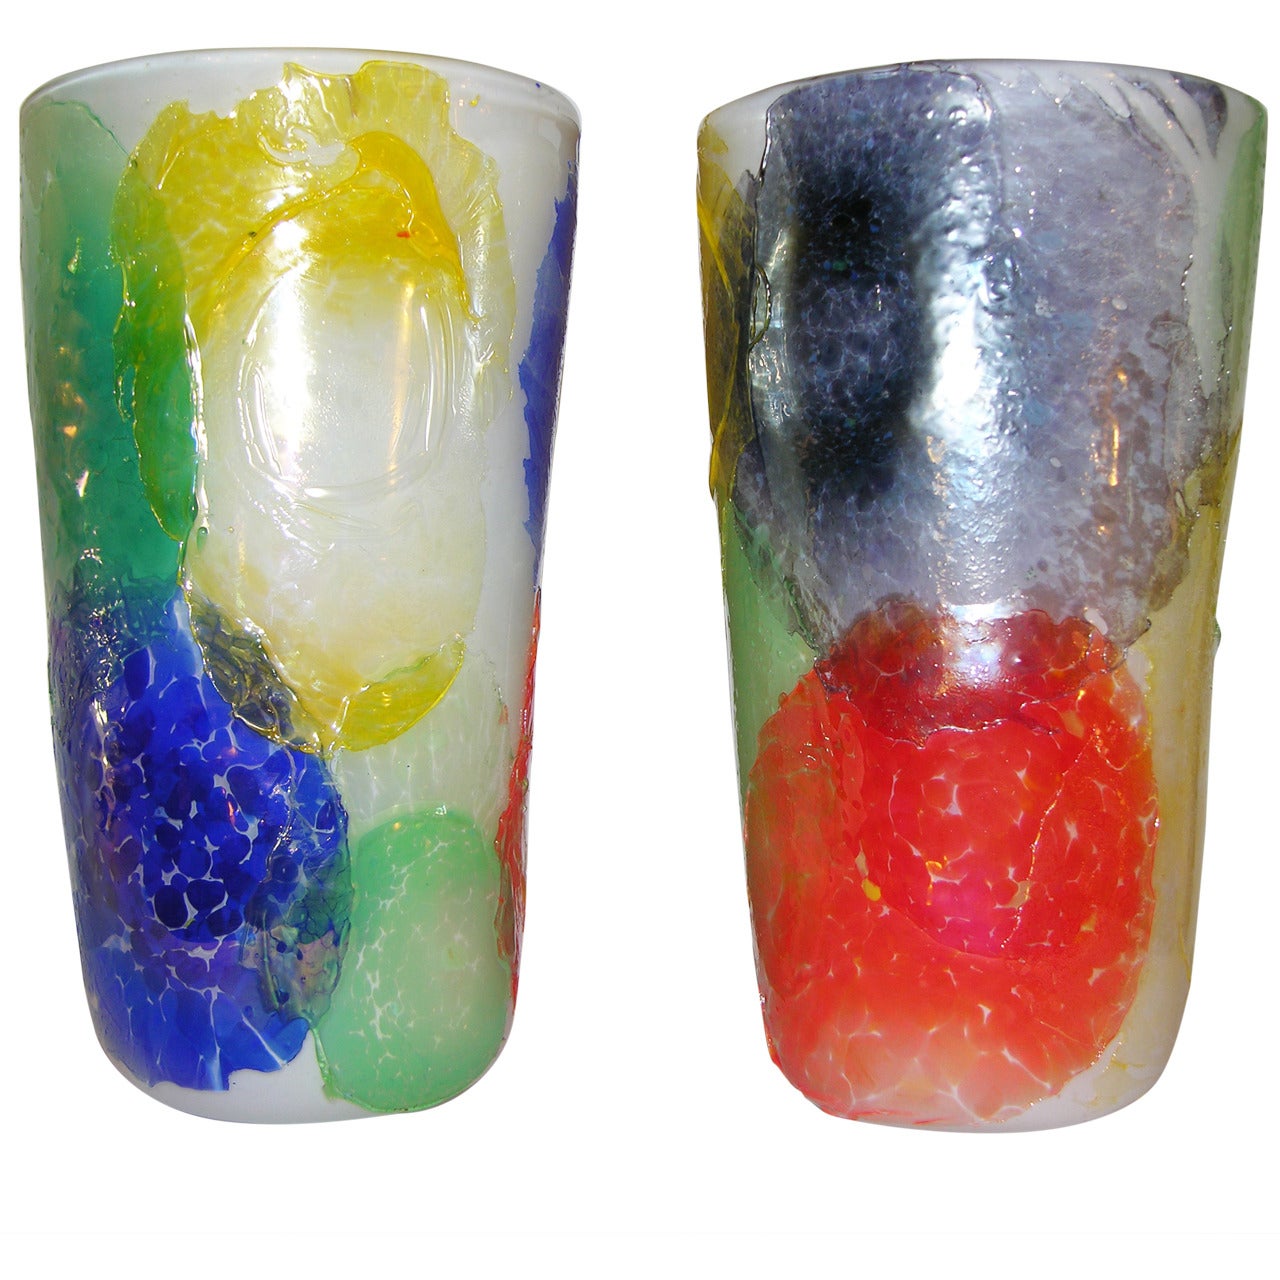 Striking Pair of Murano Glass Vases Decorated with Colorful Iridescent Disks